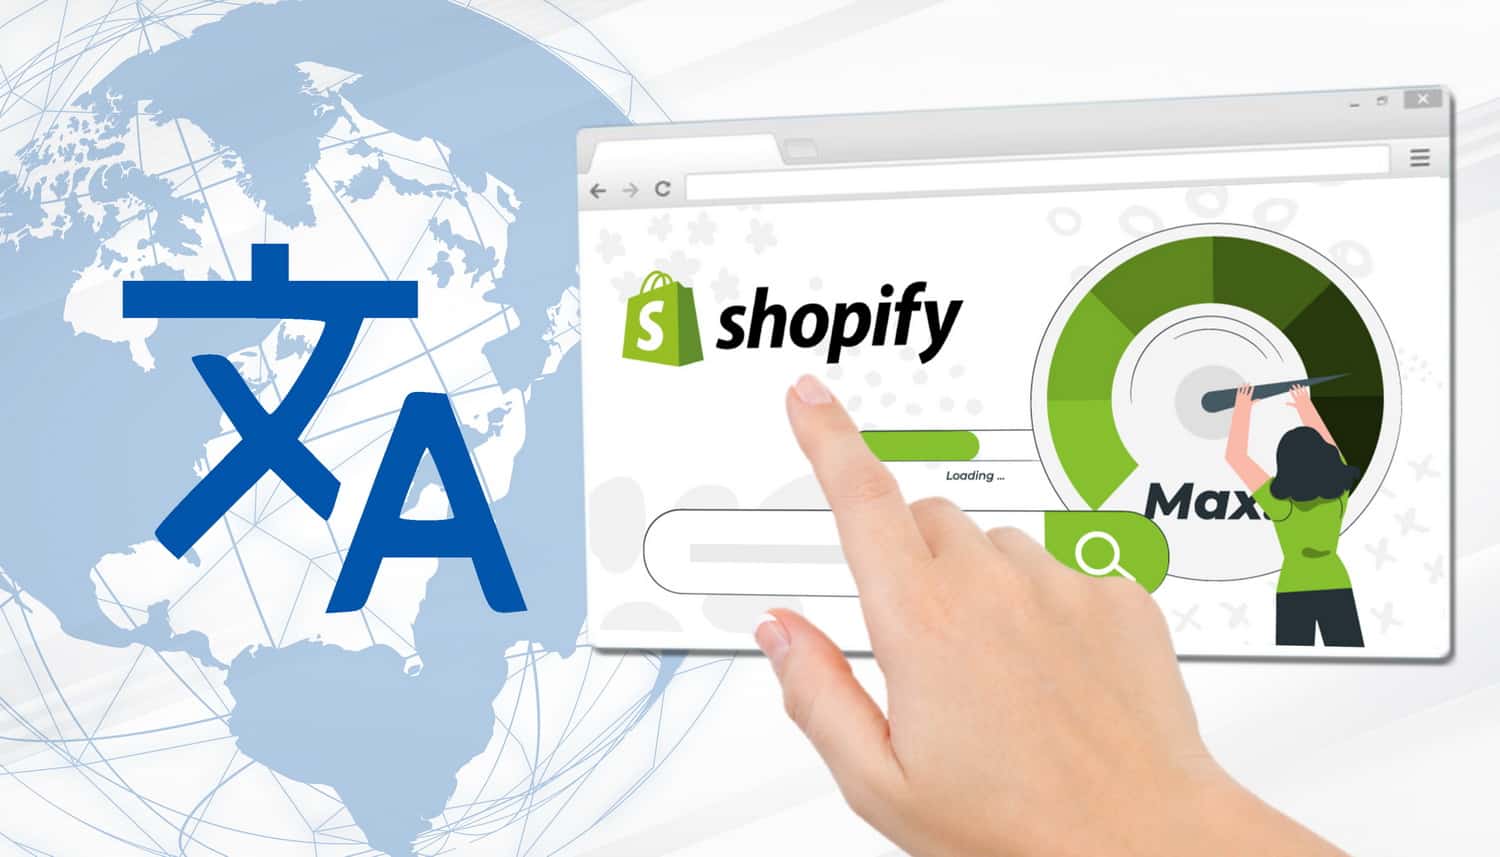 "Having a multilingual Shopify store can take your business to the next level."